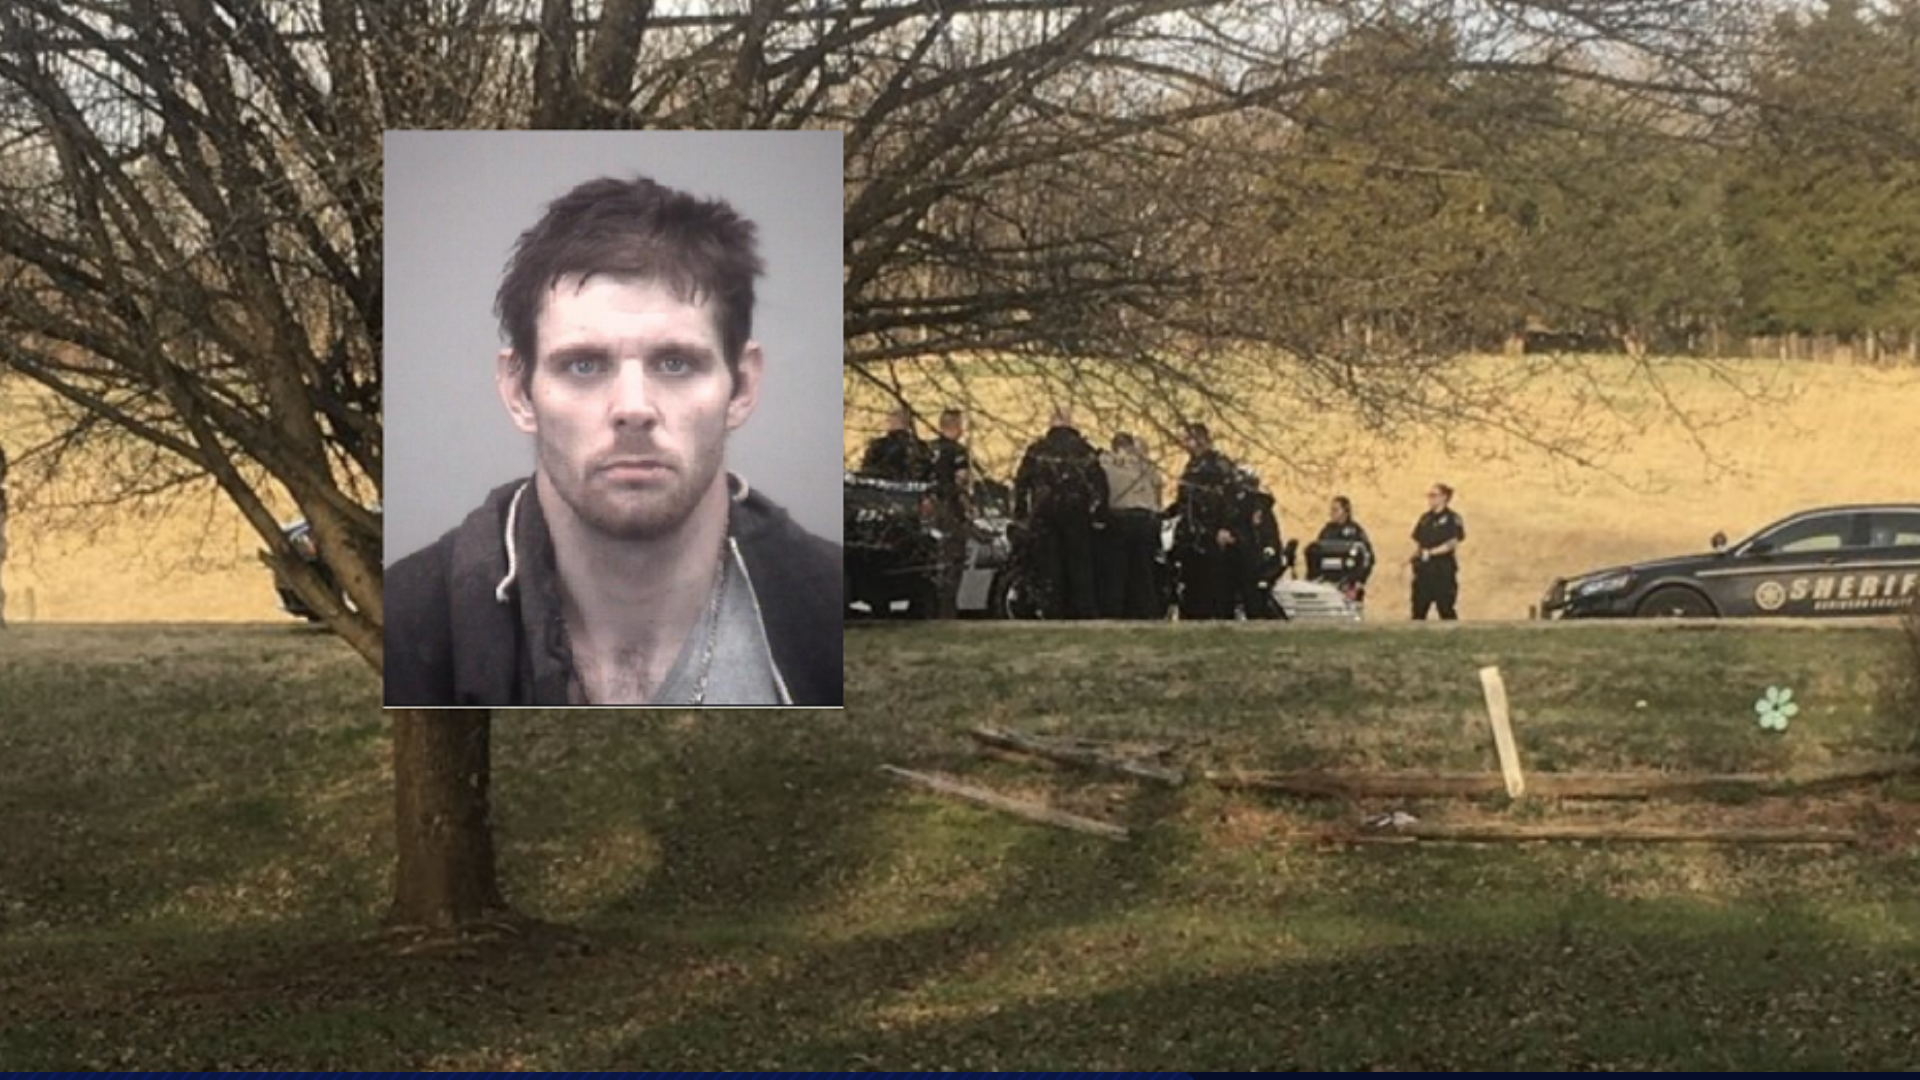 A man wanted in Virginia for trying to murder an officer was captured Friday morning in Thomasville. Police say Billy Stratton is also wanted on outstanding warrants in Tennessee and West Virginia.